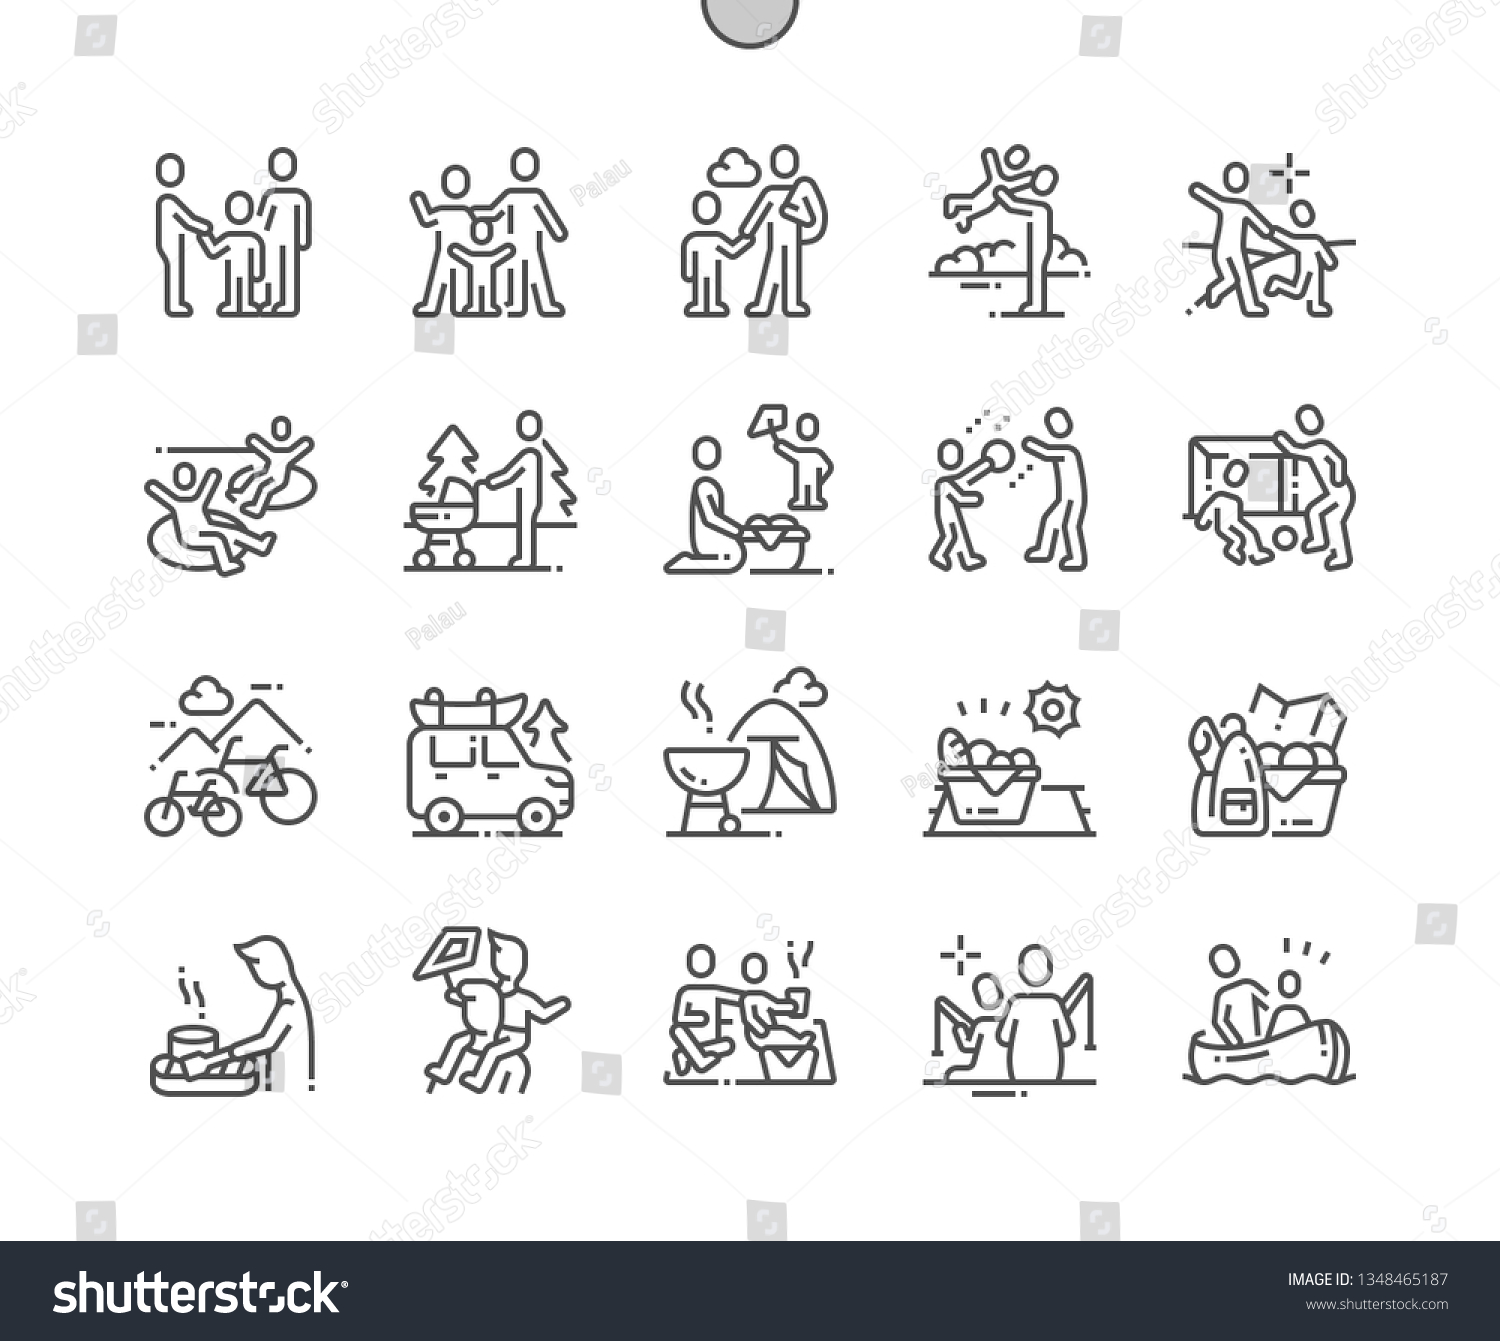 Family outdoor recreation Well-crafted Pixel Perfect Vector Thin Line Icons 30 2x Grid for Web Graphics and Apps. Simple Minimal Pictogram #1348465187